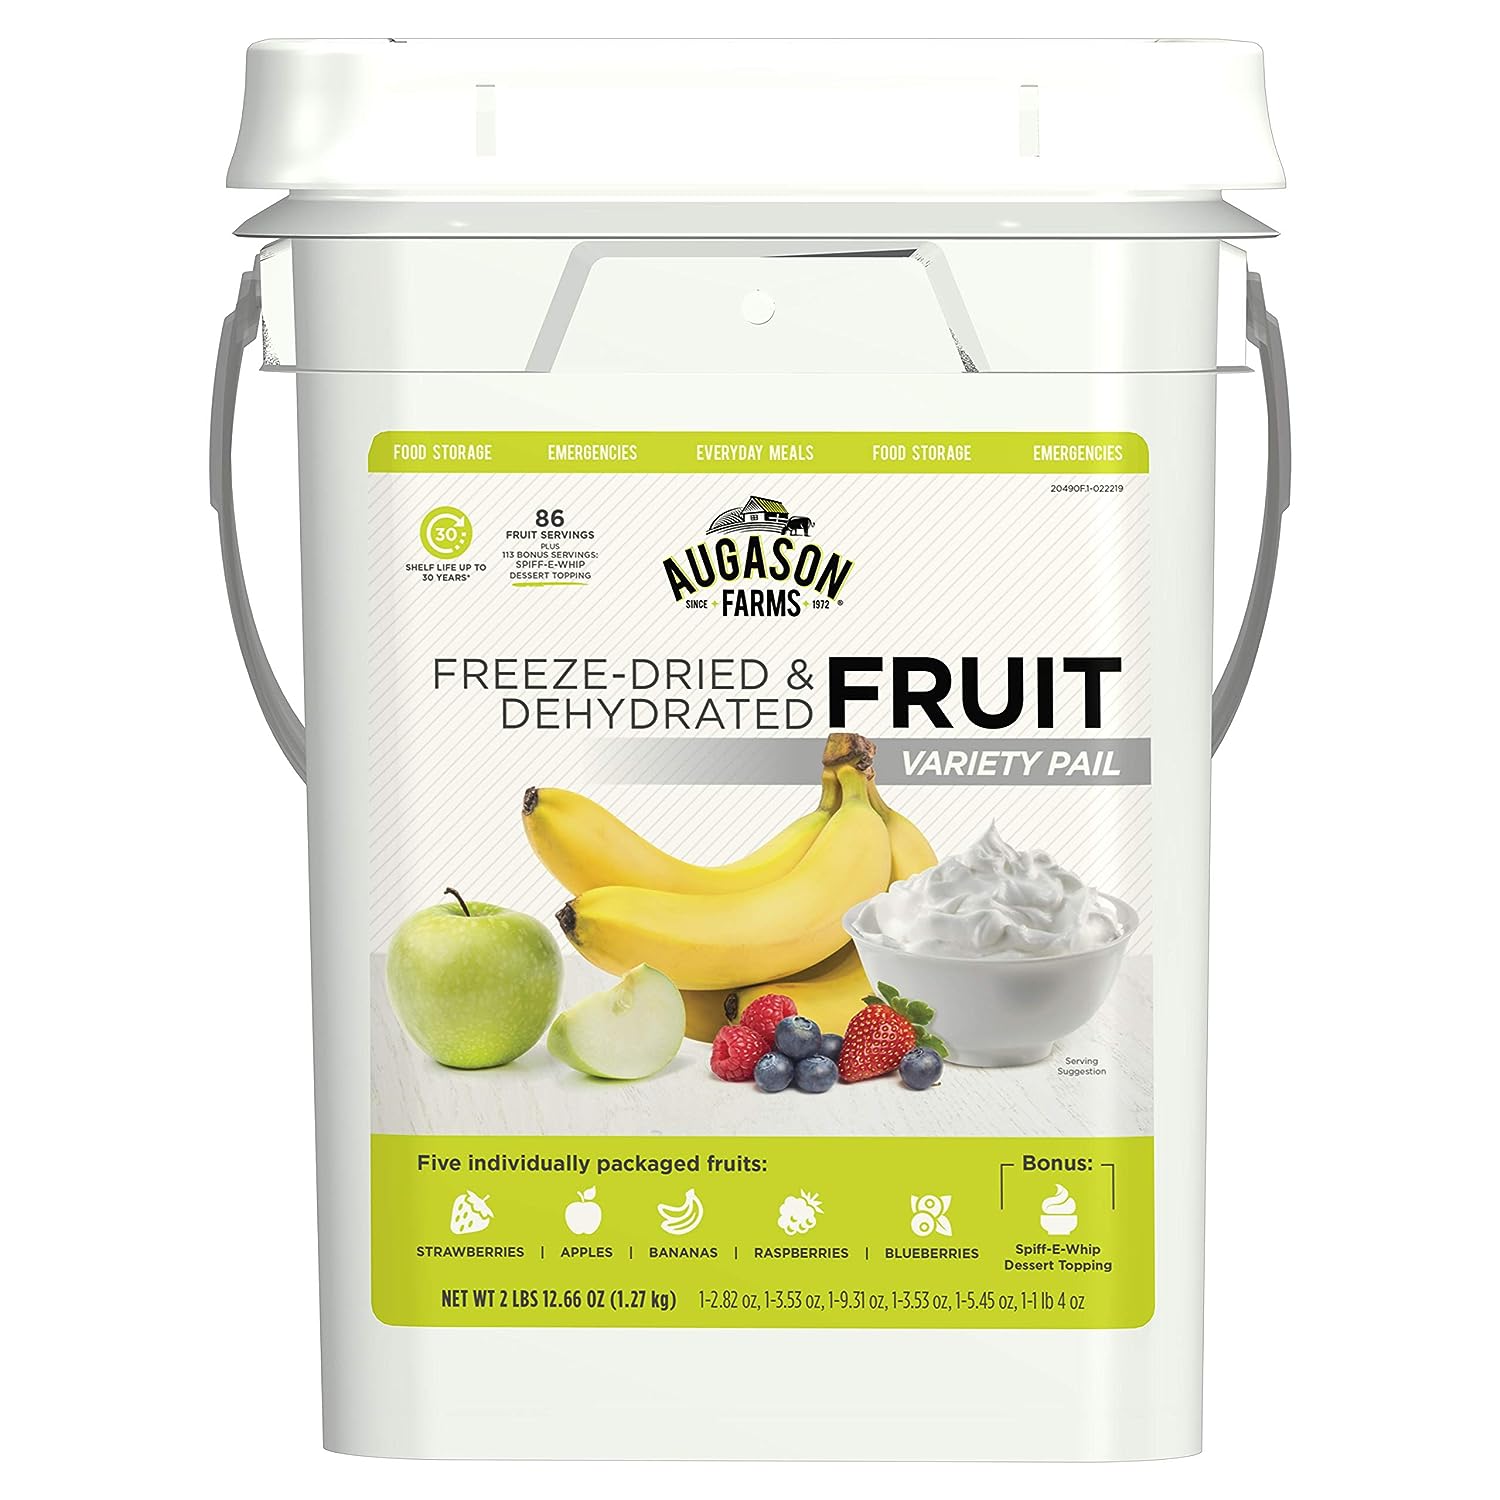 Augason Farms Dehydrated and Freeze-Dried Fruit Variety Pail, 25-Year Shelf Life, Emergency Food Supply- 86 Servings